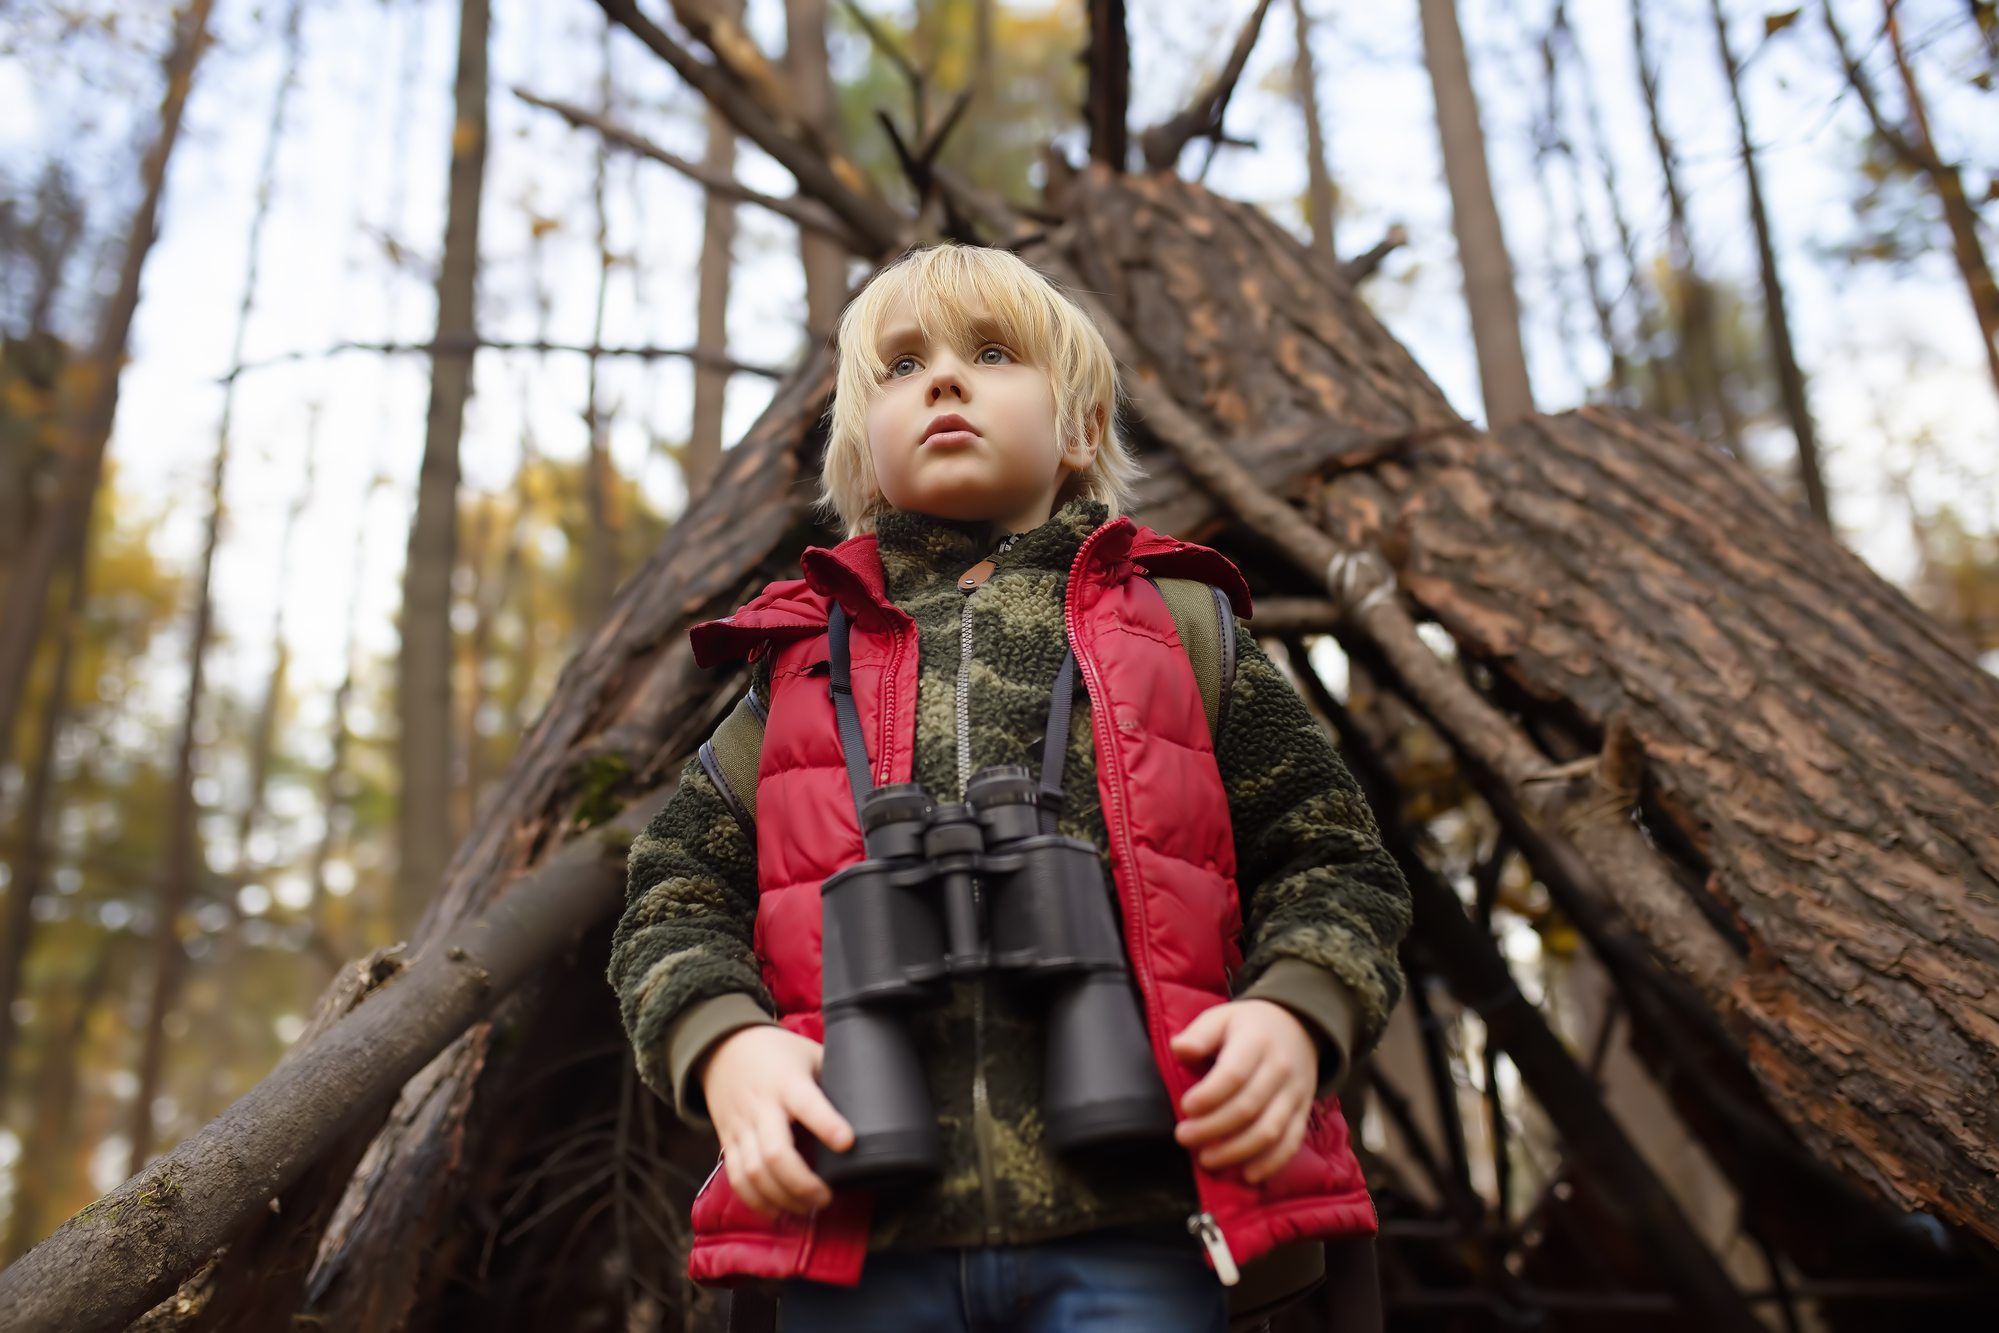 Young boy with binoculars stands in front of teepee tent in the woods